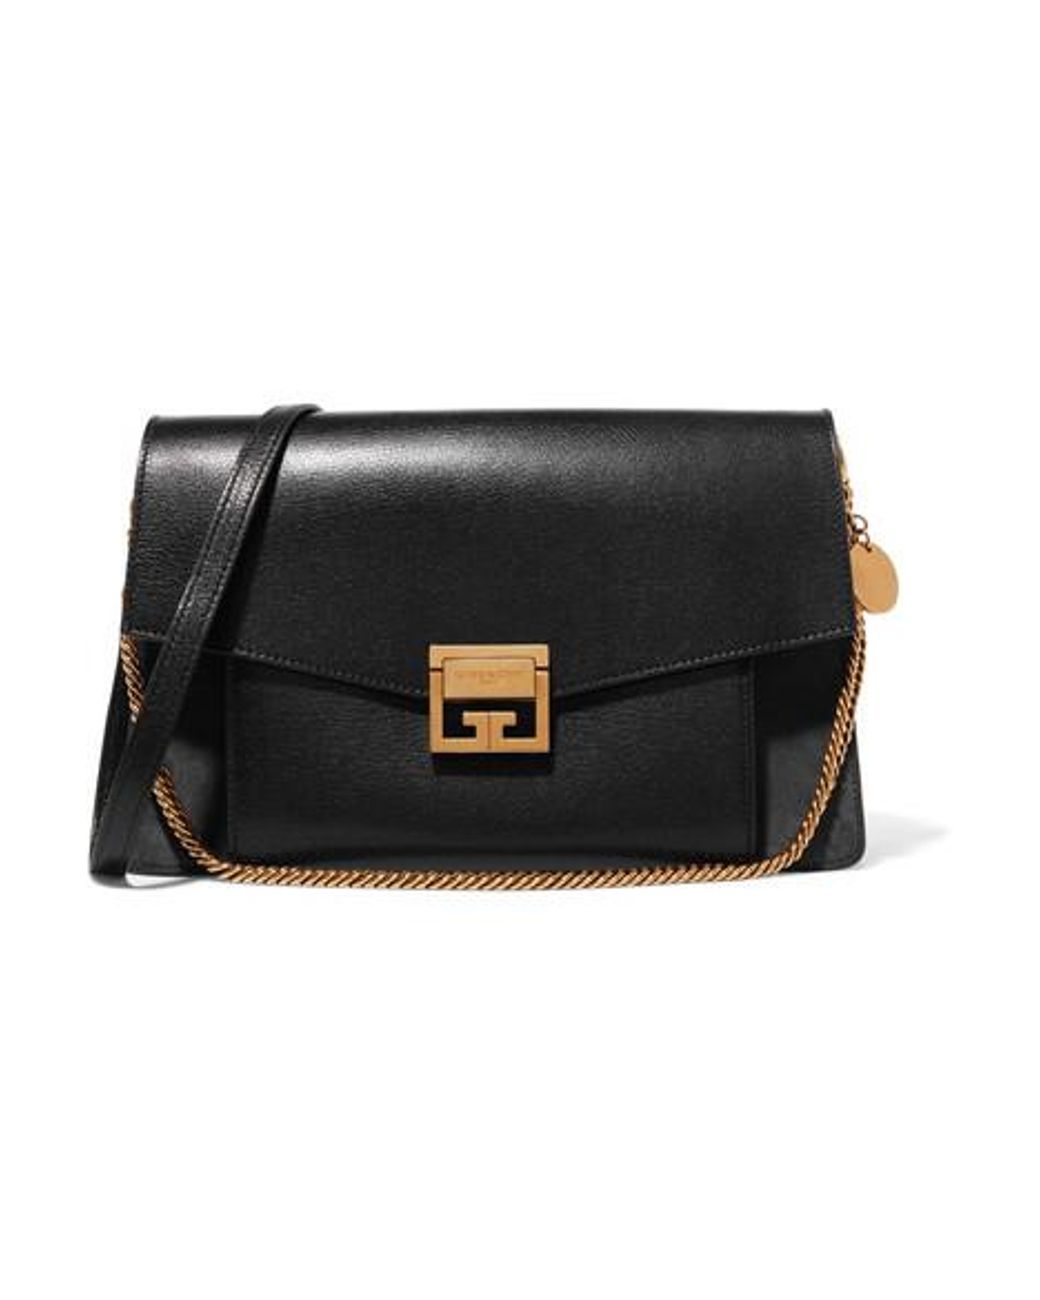 Givenchy Black Suede Exterior Bags & Handbags for Women, Authenticity  Guaranteed